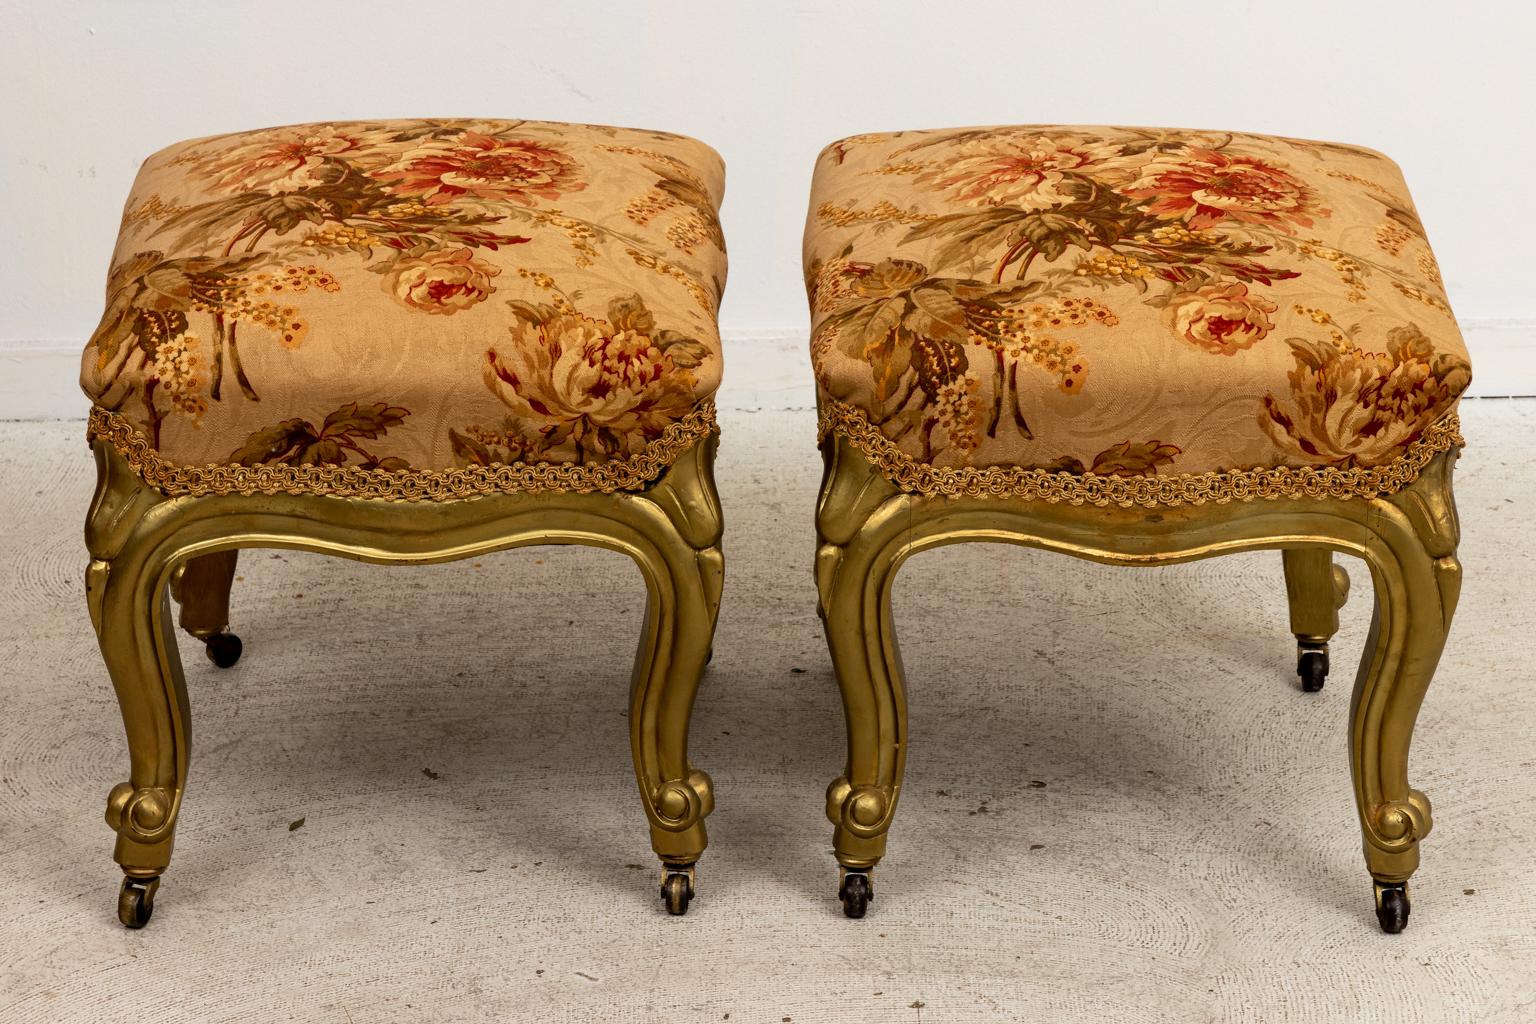 Circa 1900-1920s pair of antique benches on casters with floral upholstery and cabriole legs. Made in the United States. Please note of wear consistent with age including slight finish loss due to age and use. The chairs also have been reupholstered